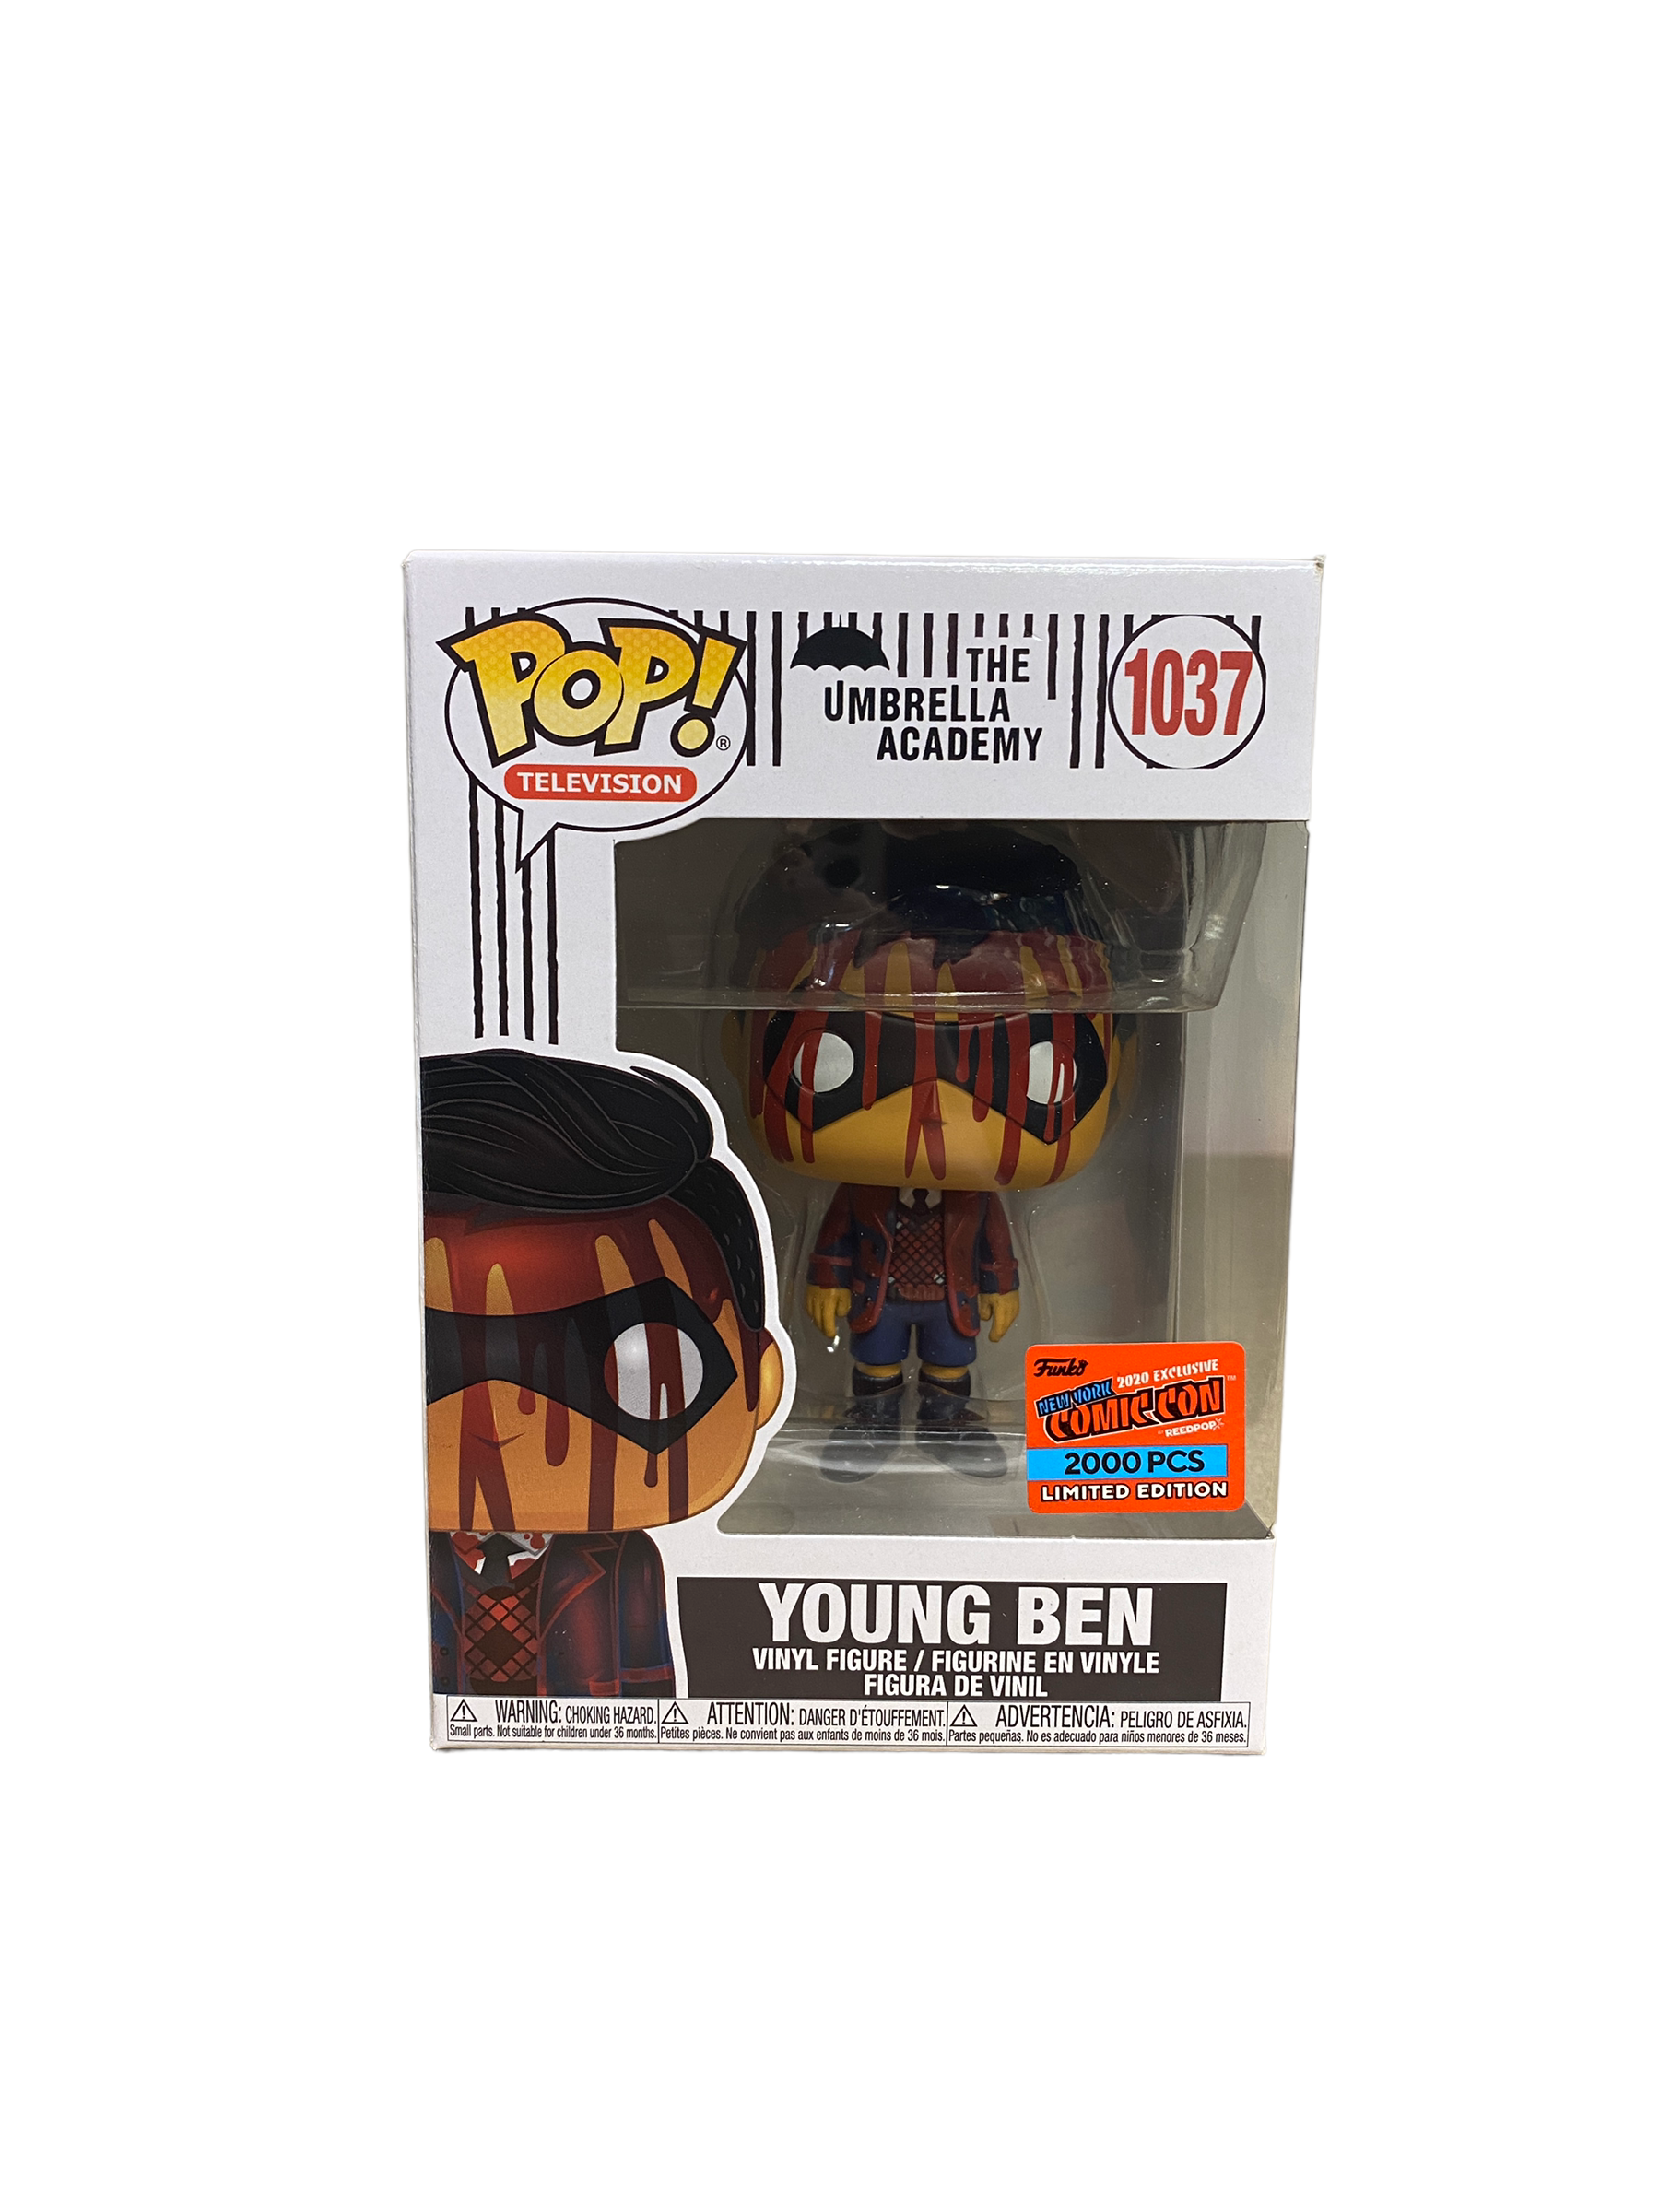 Young Ben #1037 (Bloody) Funko Pop! - The Umbrella Academy - NYCC 2020 Exclusive LE2000 Pcs - Condition 8.75/10